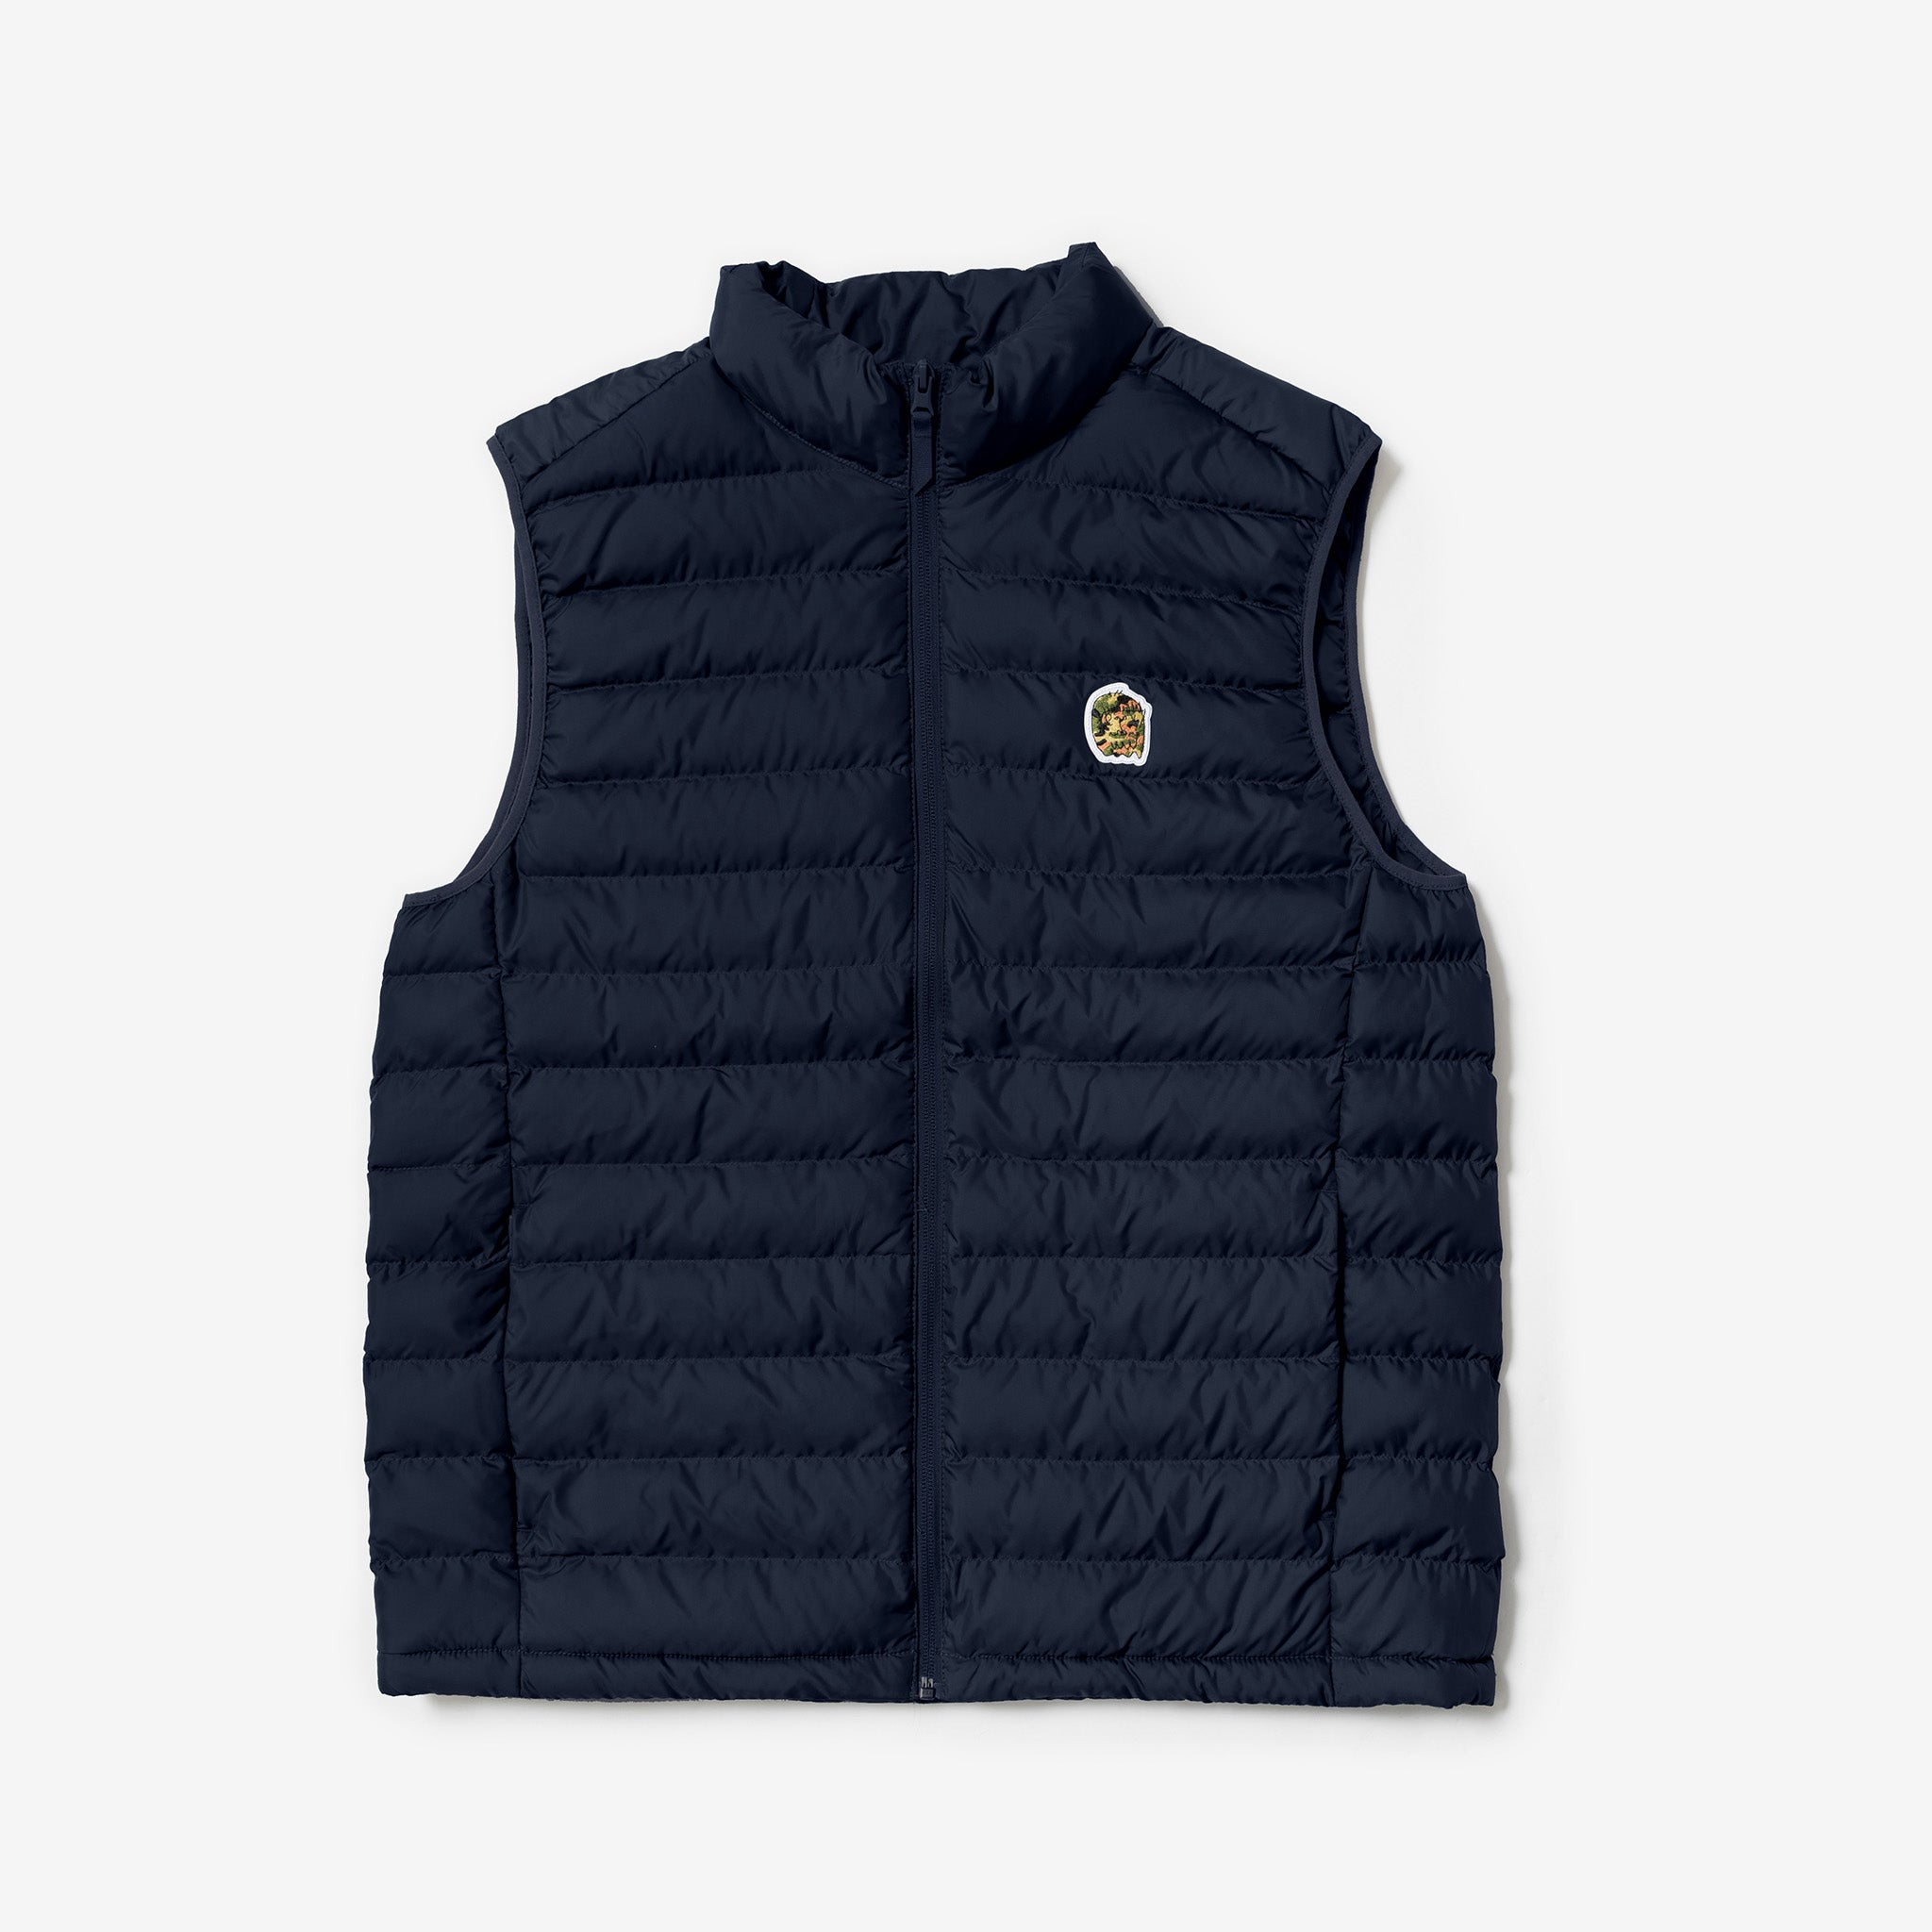 FORTY Kelso Gilet (Navy) xccscss.